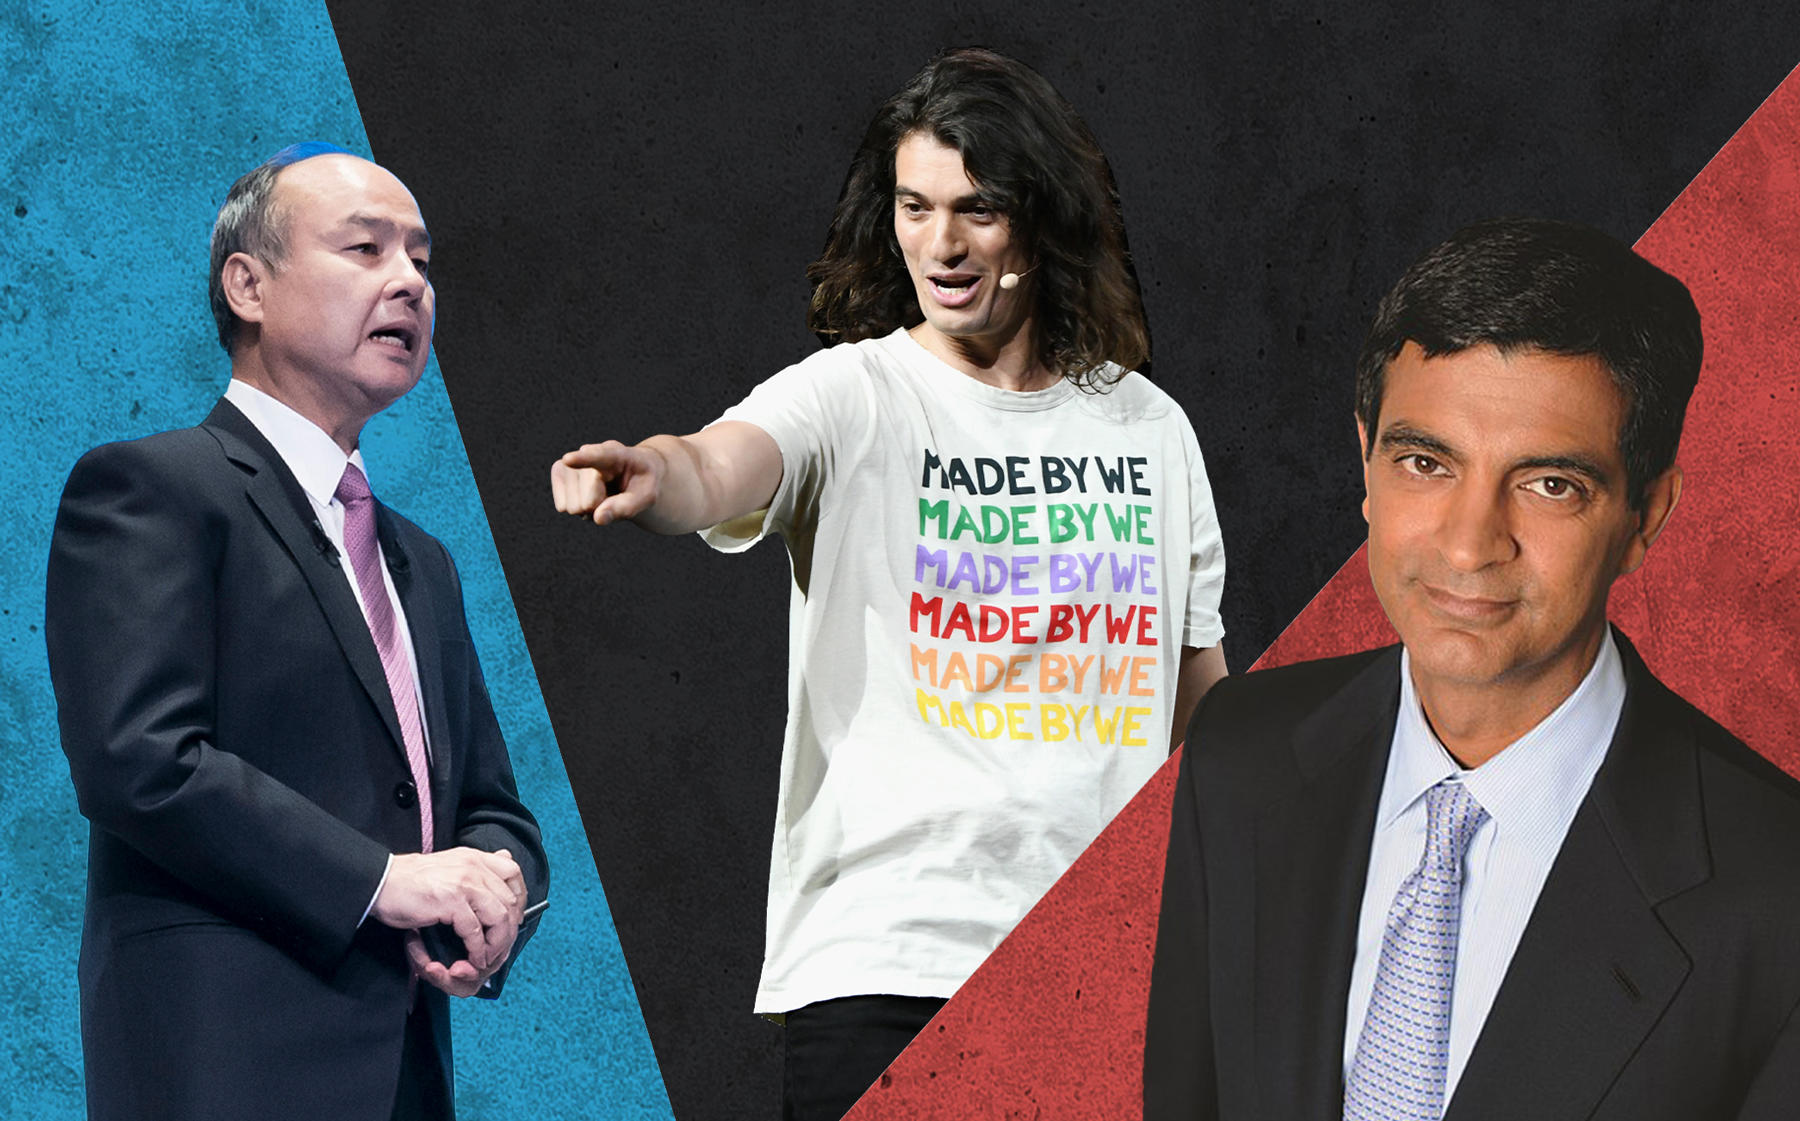 From left: Softbank CEO Masayoshi Son, WeWork co-founder Adam Neumann and  WeWork CEO Sandeep Mathrani (Credit: Getty Images)